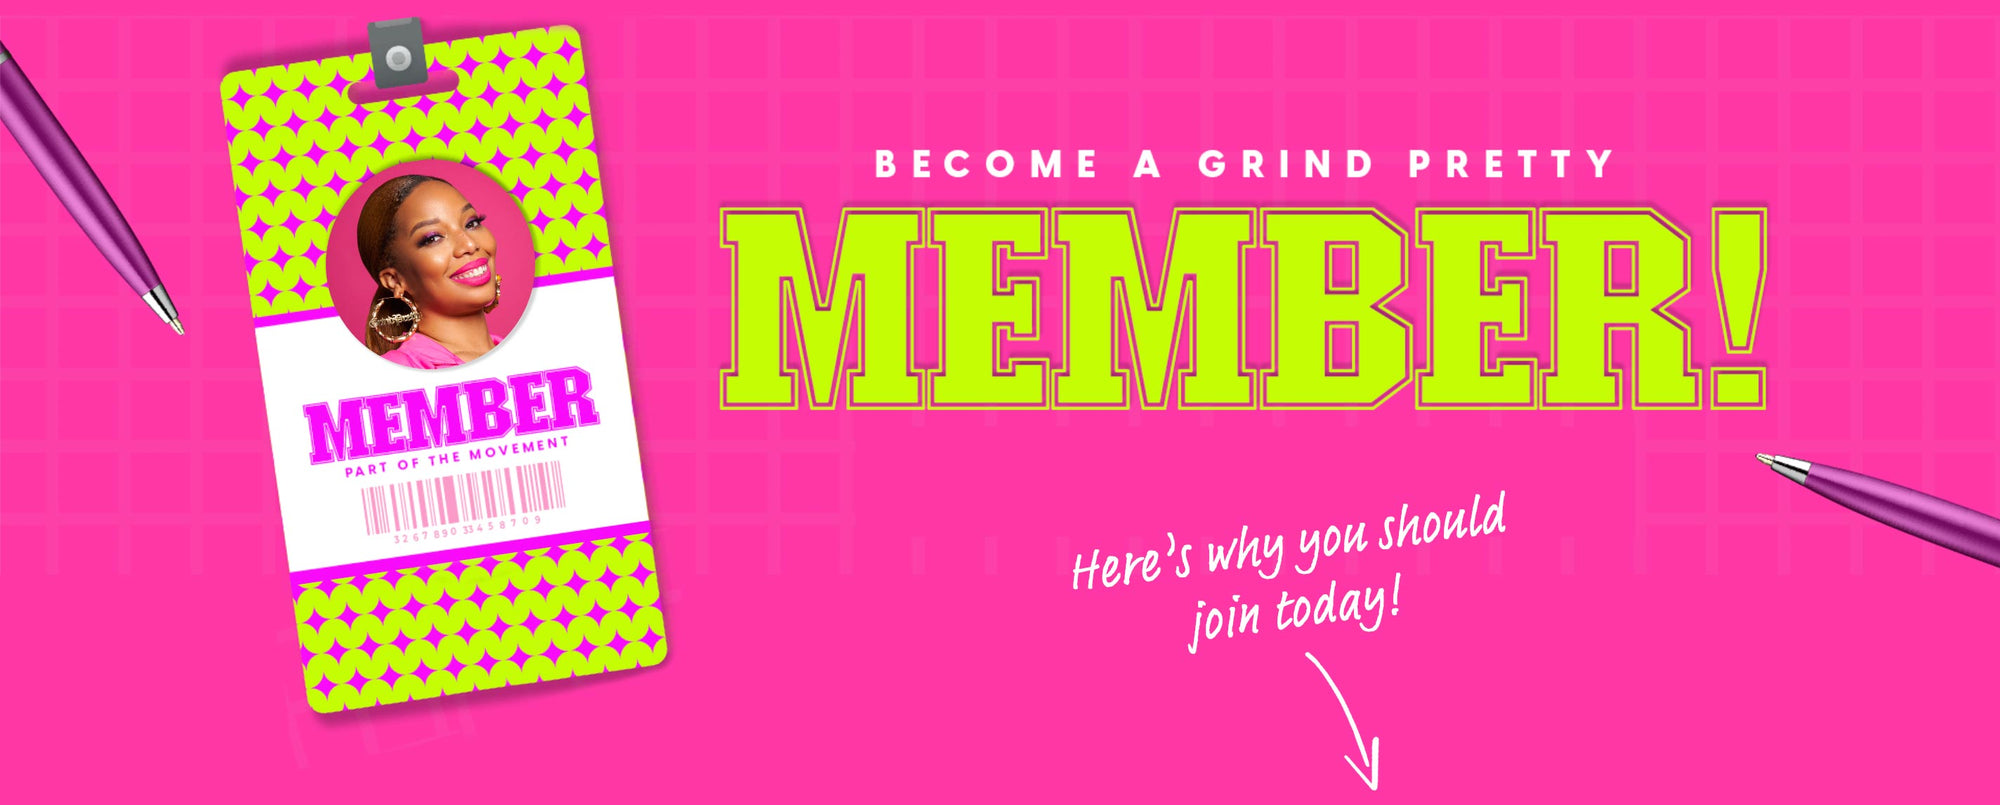 Become a Grind Pretty Member! Here's why you should join today.